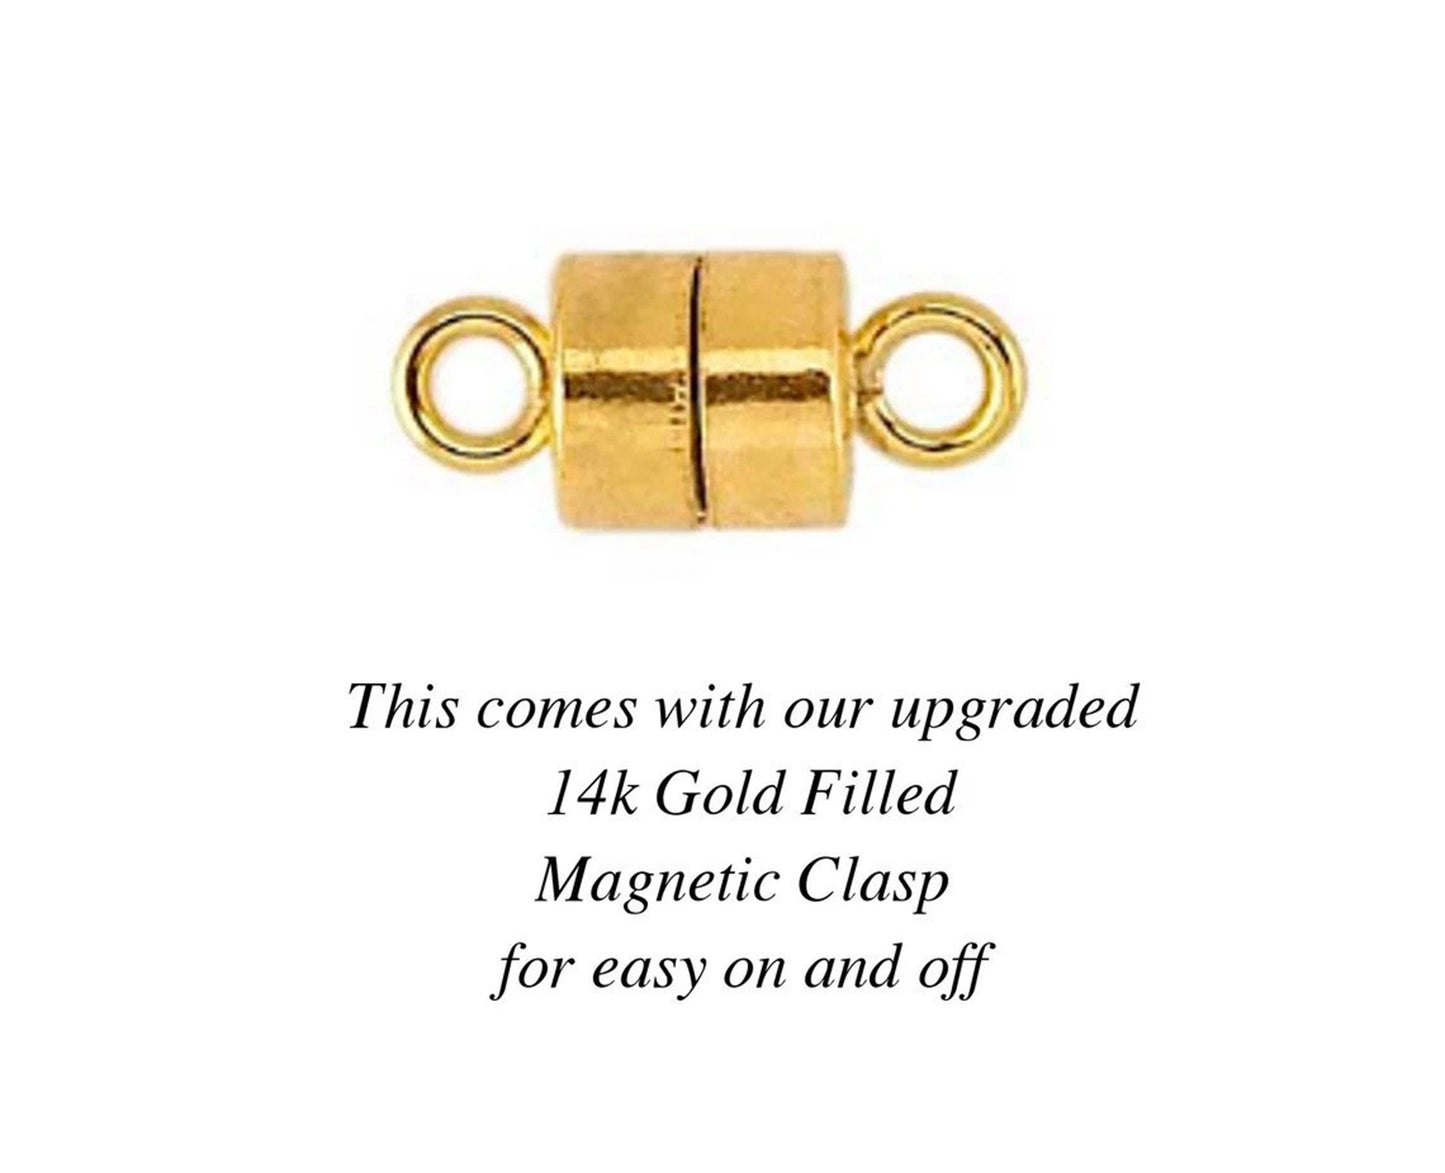 Magnetic jewelry clasp in 14 carat gold filled finish that comes standard on custom angel wing bracelet is shown against a plain white background with descriptive text explaining the quality of Gilded Sapphire's custom jewelry. 